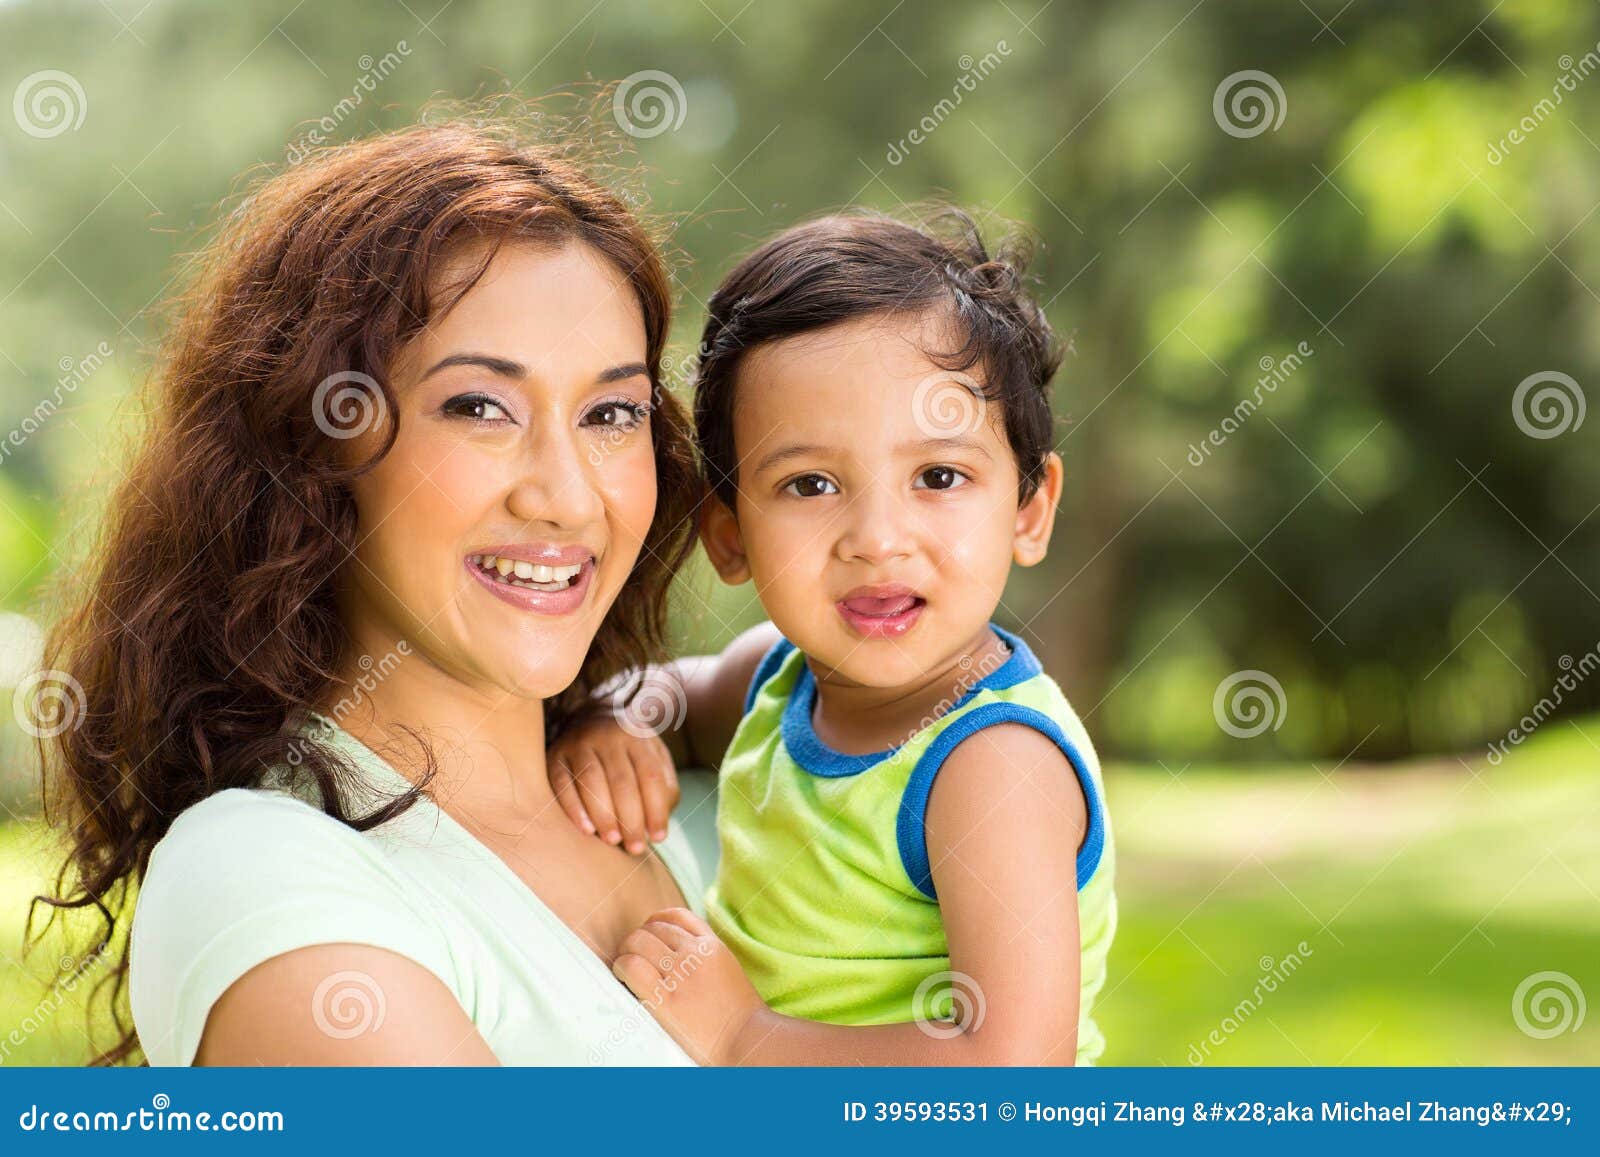 1 503 Indian Mother Baby Girl Photos Free Royalty Free Stock Photos From Dreamstime Choose from over a million free vectors, clipart graphics, vector art images, design templates, and illustrations created by artists worldwide! dreamstime com